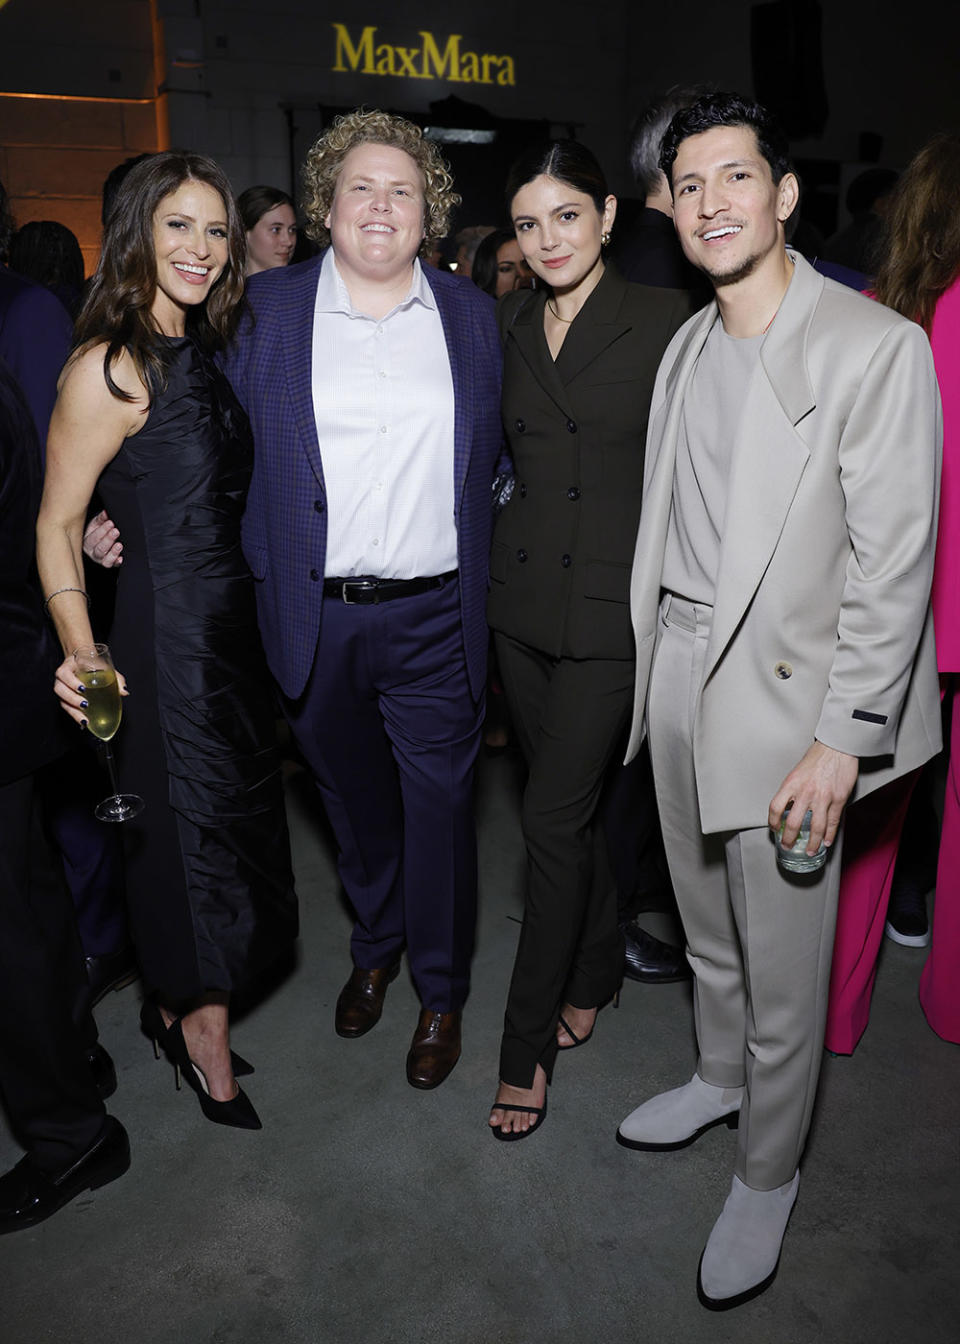 (L-R) Andrea Savage, Fortune Feimster, Monica Barbaro, and Danny Ramirez attend the 16th Annual WIF Oscar® Party Presented By Johnnie Walker, Max Mara, And Mercedes-Benz on March 10, 2023 in Los Angeles, California.